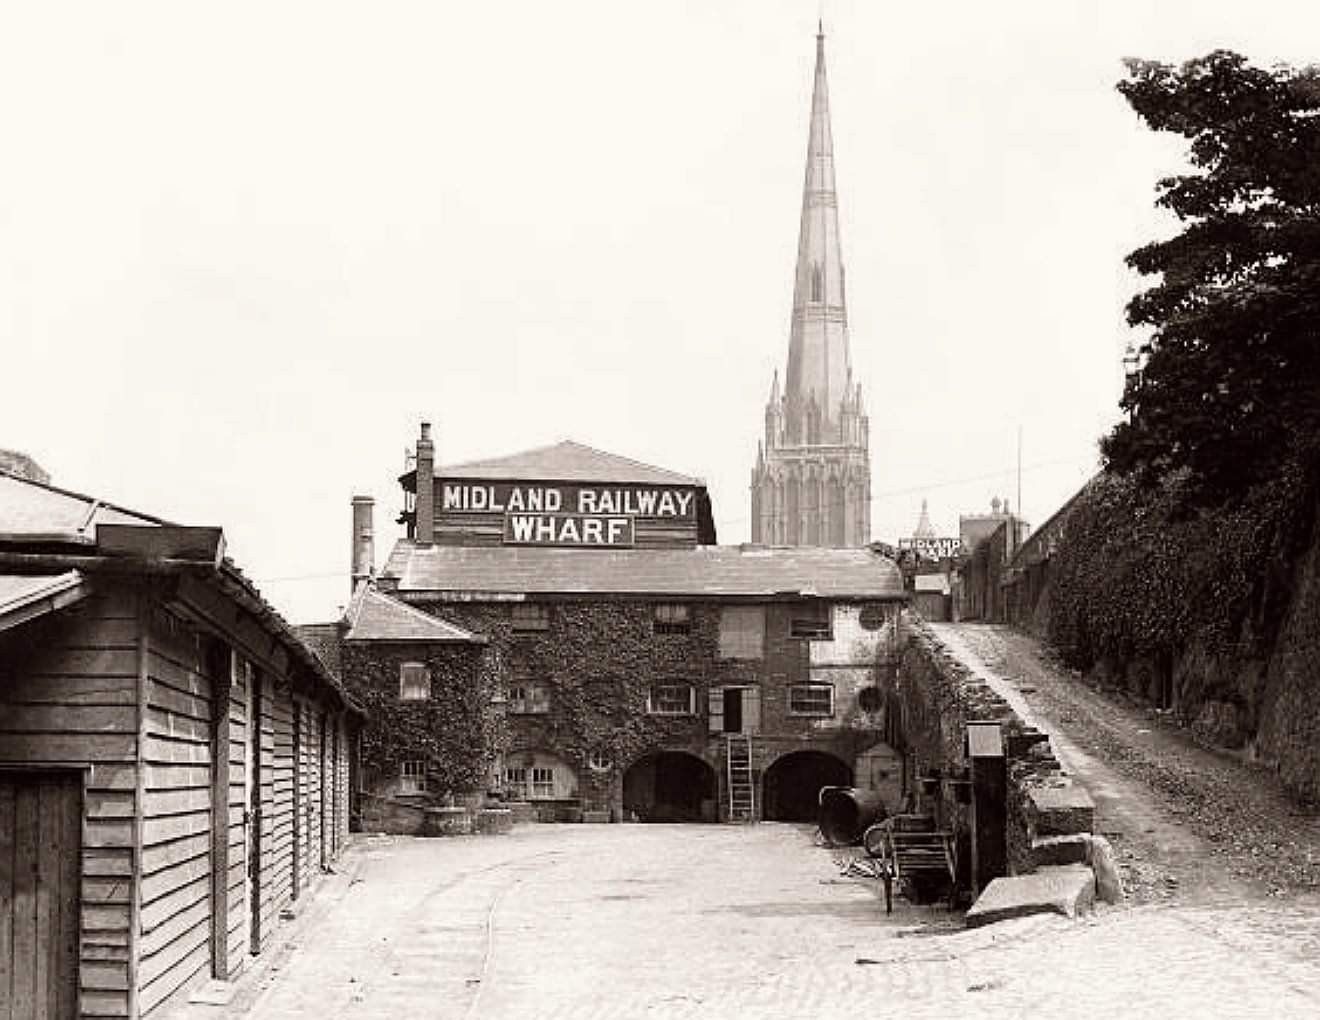 A historical photograph of Midland Railway Wharf and St Mary Redcliffe Church